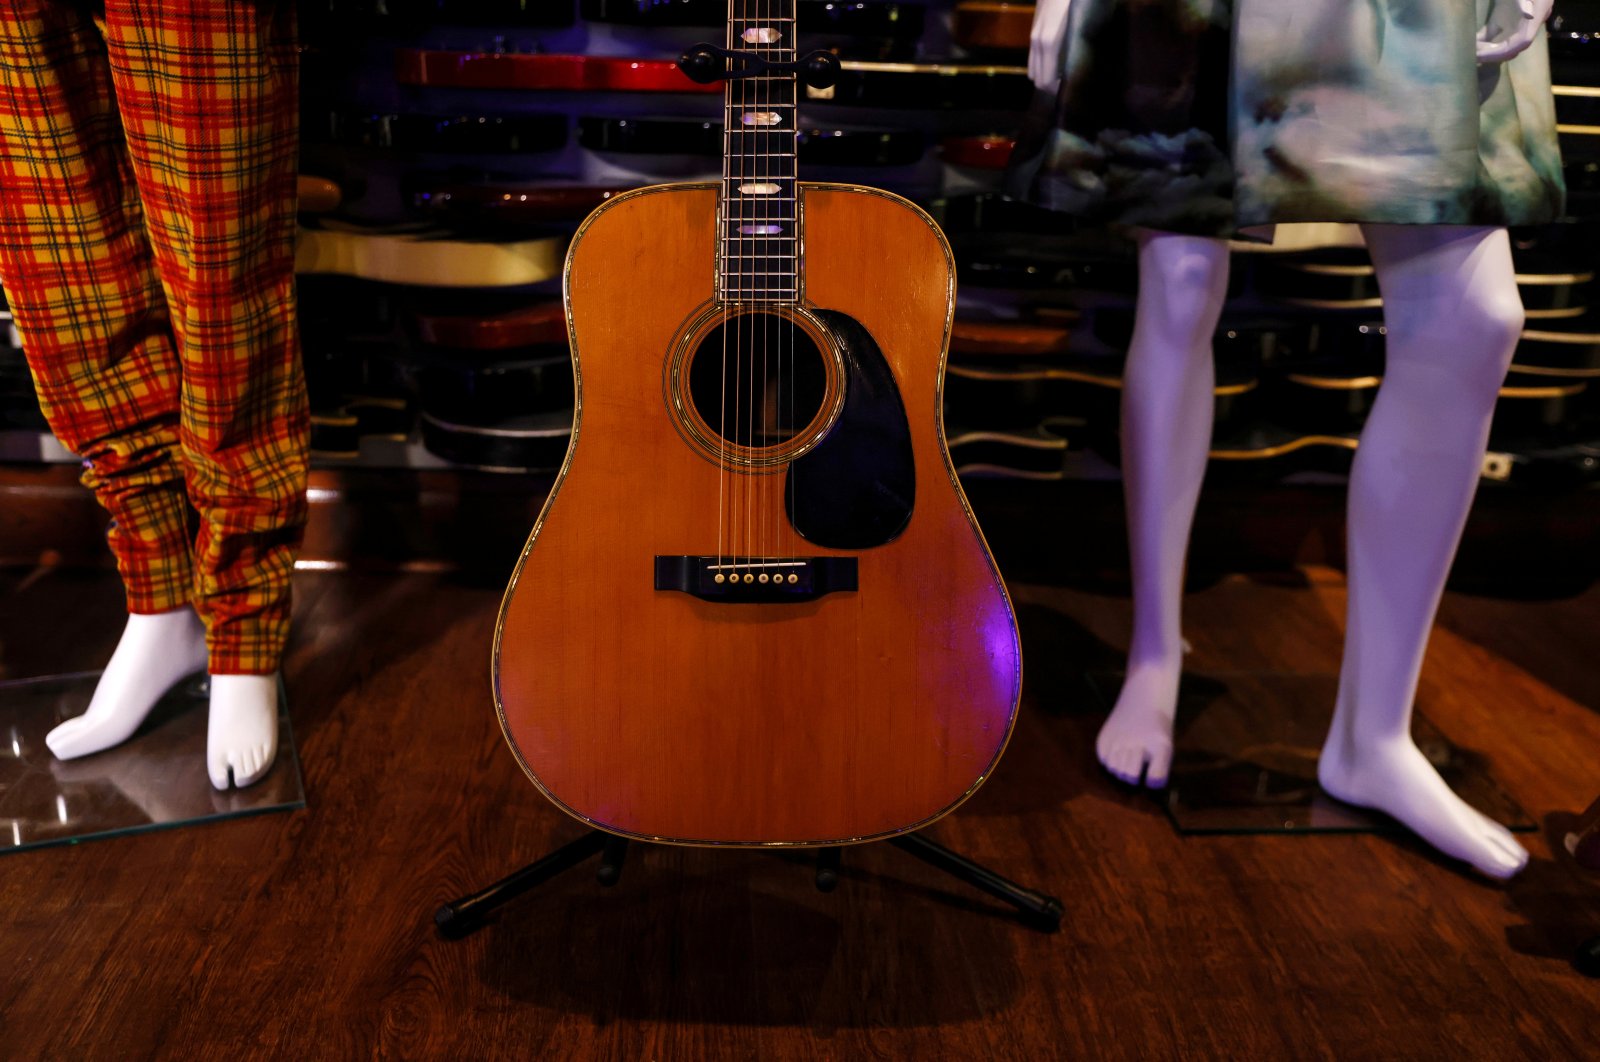 A Martin D-45 acoustic guitar, previously owned and played on stage by Eric Clapton, sits on display at Julien’s Auctions and Public Exhibition media preview at the Hard Rock Cafe at Times Square in New York City, U.S., Nov. 15, 2021. (REUTERS Photo)